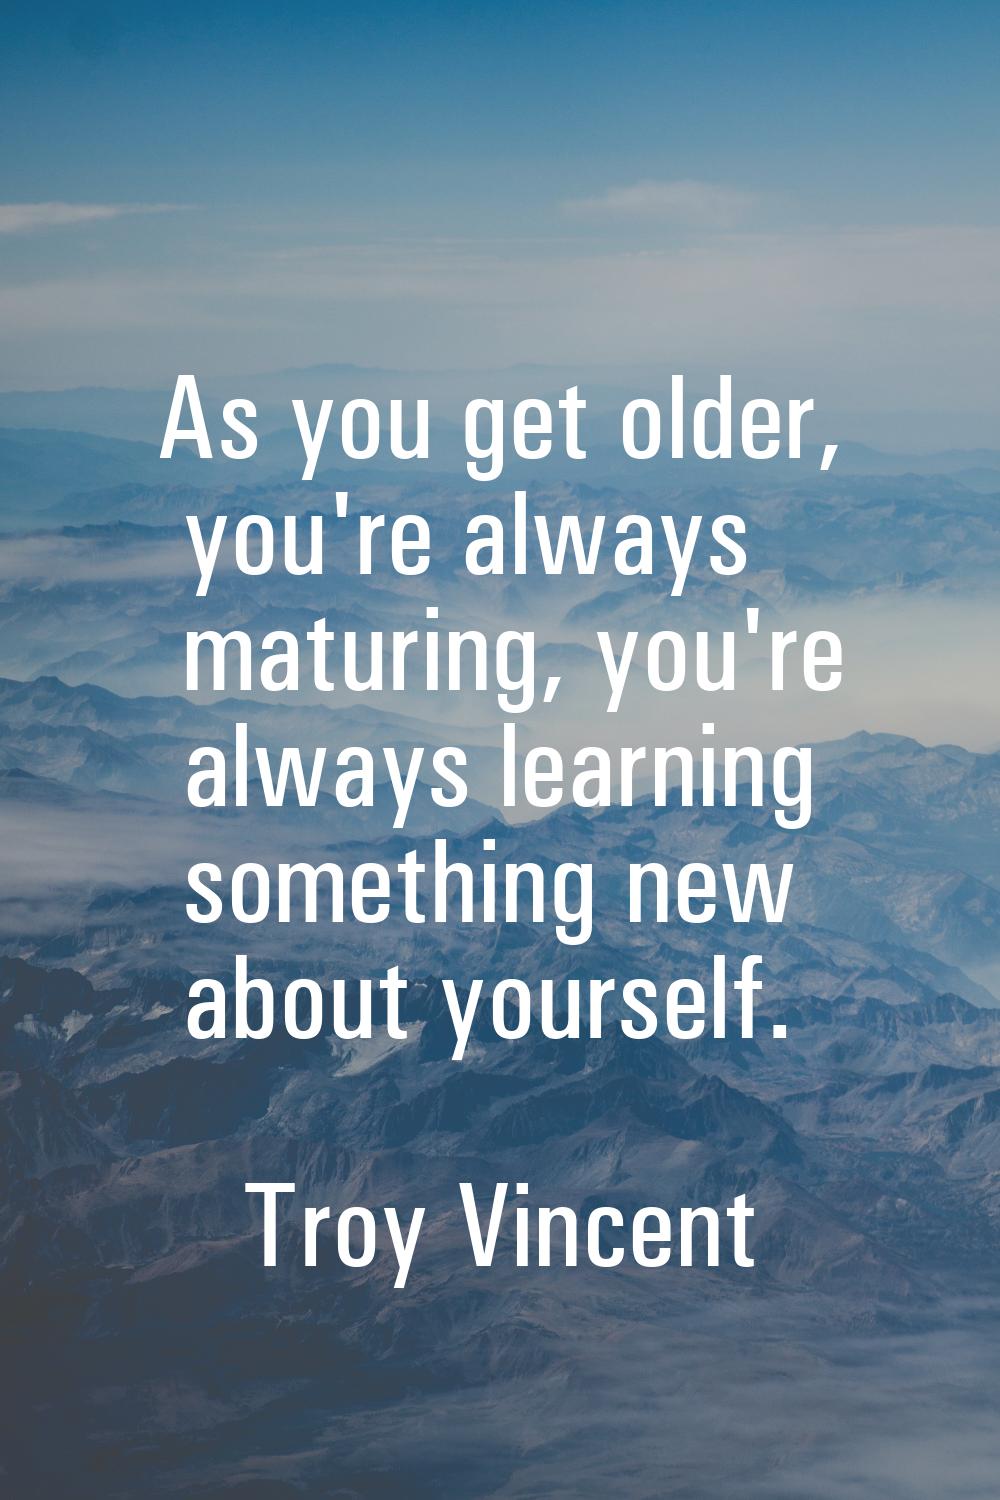 As you get older, you're always maturing, you're always learning something new about yourself.